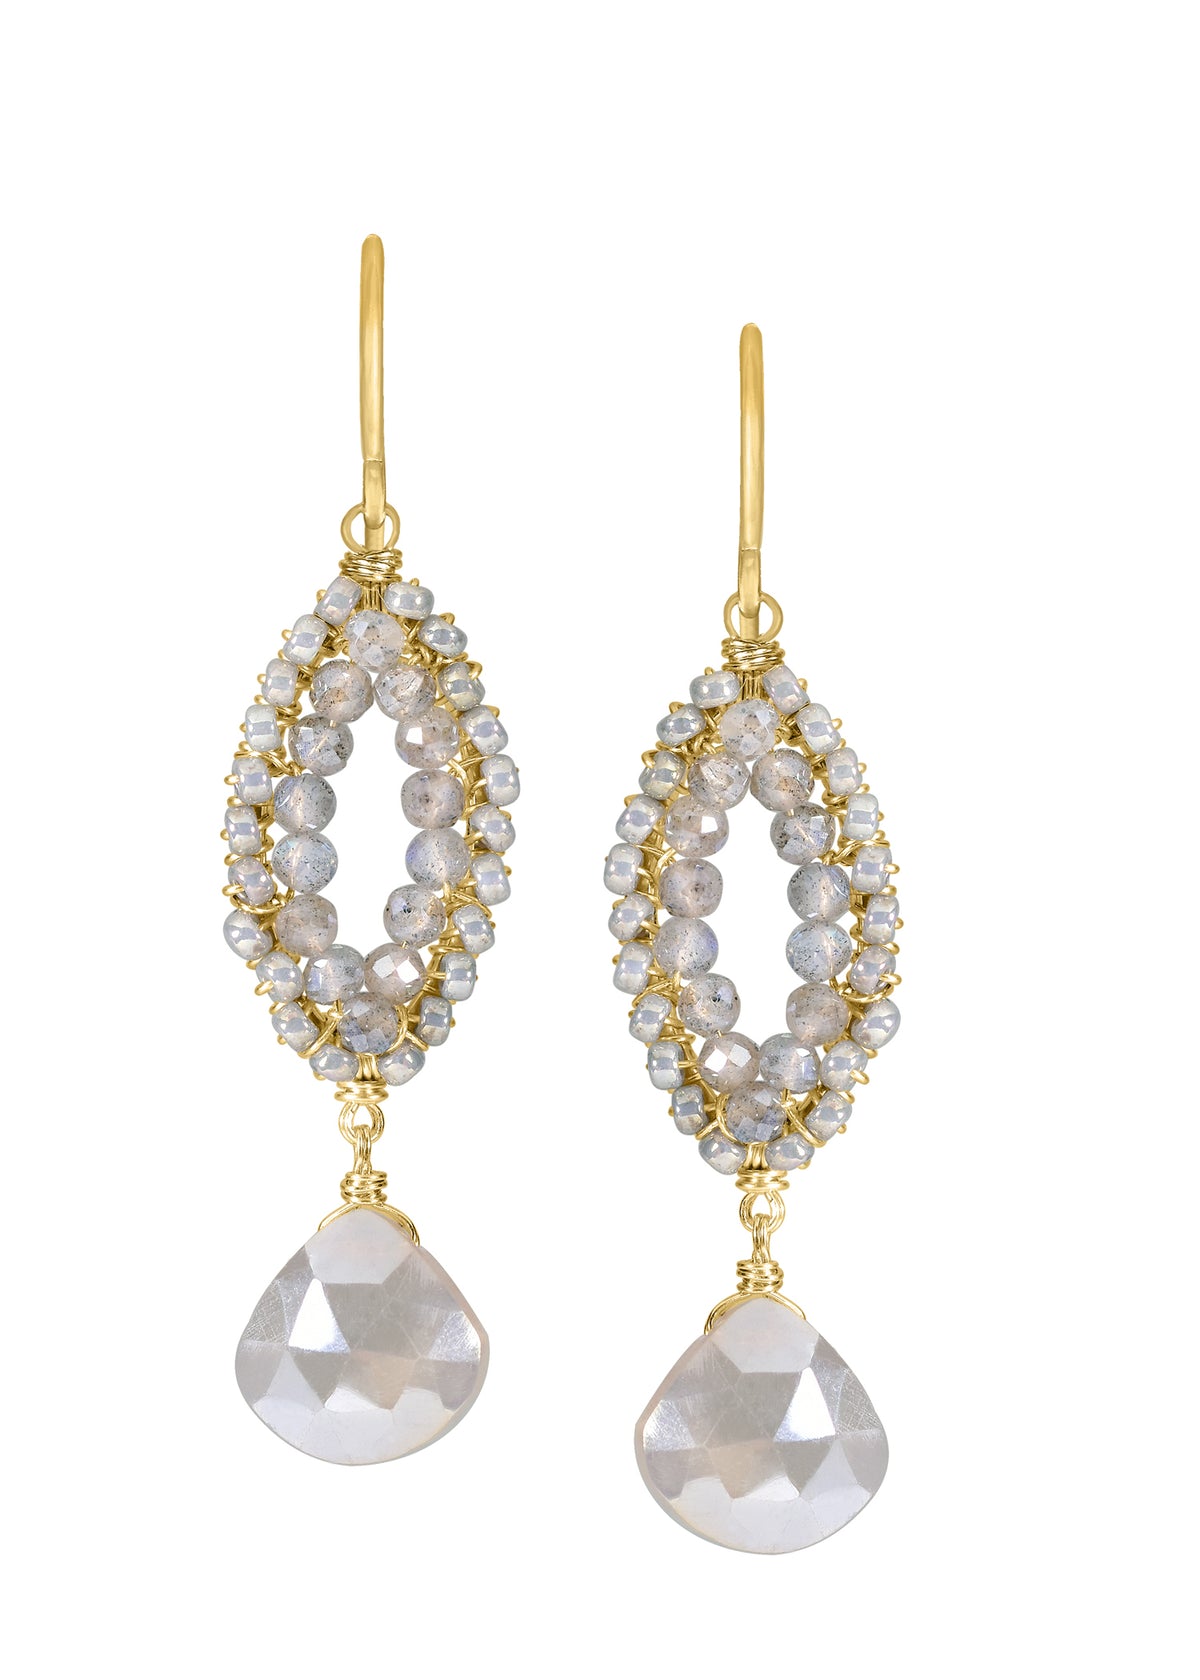 Labradorite Gray moonstone Seed beads 14k gold fill Earrings measure 1-5/8&quot; in length (including the ear wires) and 3/8&quot; in width at the widest point Handmade in our Los Angeles studio